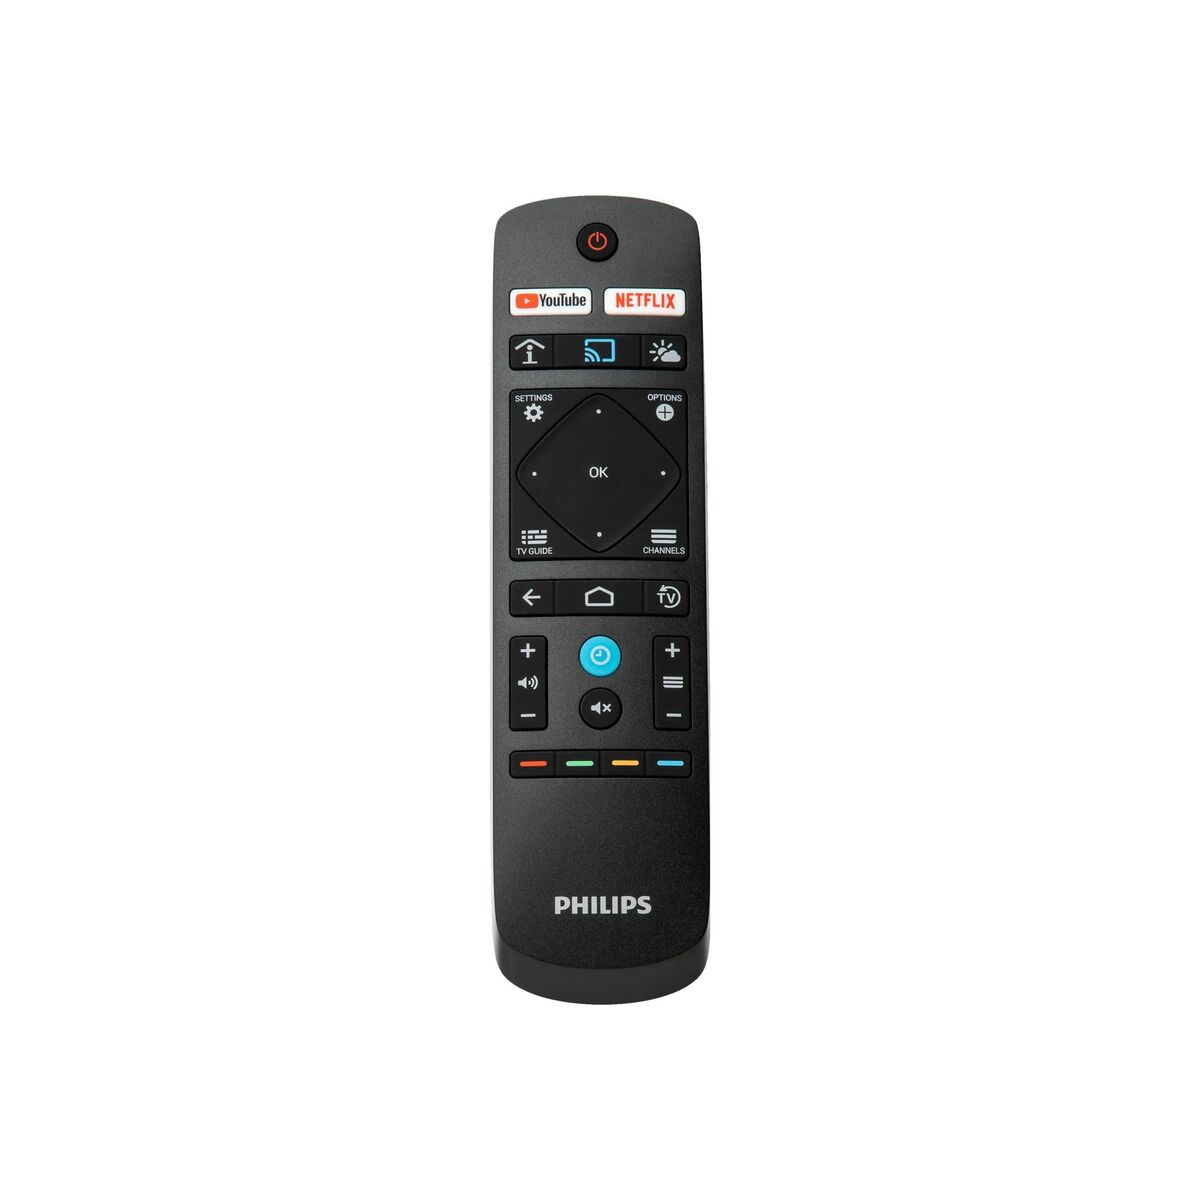 Smart TV Philips 32HFL5114/12 Full HD 32" LED, Philips, Electronics, TV, Video and home cinema, smart-tv-philips-32hfl5114-12-full-hd-32-led, :Full HD, :Ultra HD, Brand_Philips, category-reference-2609, category-reference-2625, category-reference-2931, category-reference-t-18805, category-reference-t-18827, category-reference-t-19653, cinema and television, Condition_NEW, entertainment, Price_400 - 500, RiotNook